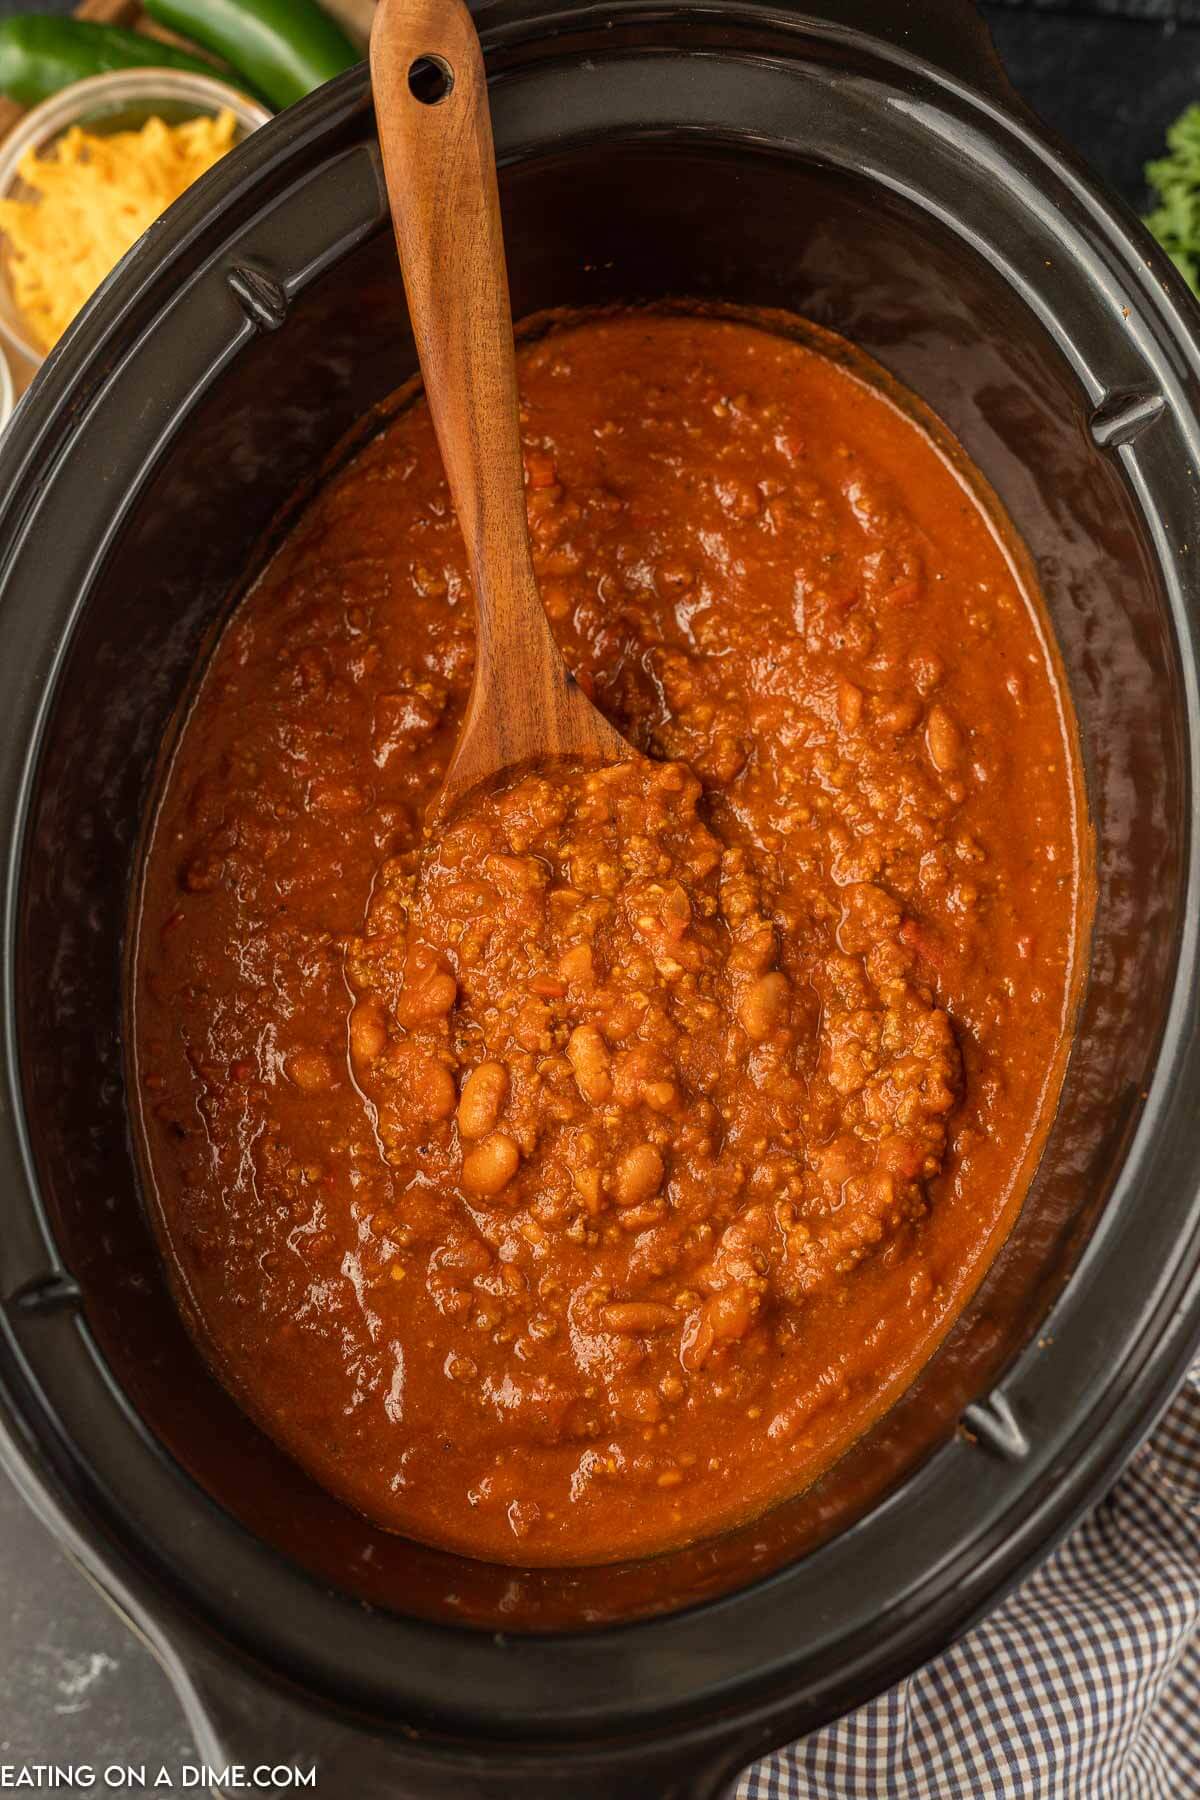 Pumpkin chili in the slow cooker with a wooden spoon